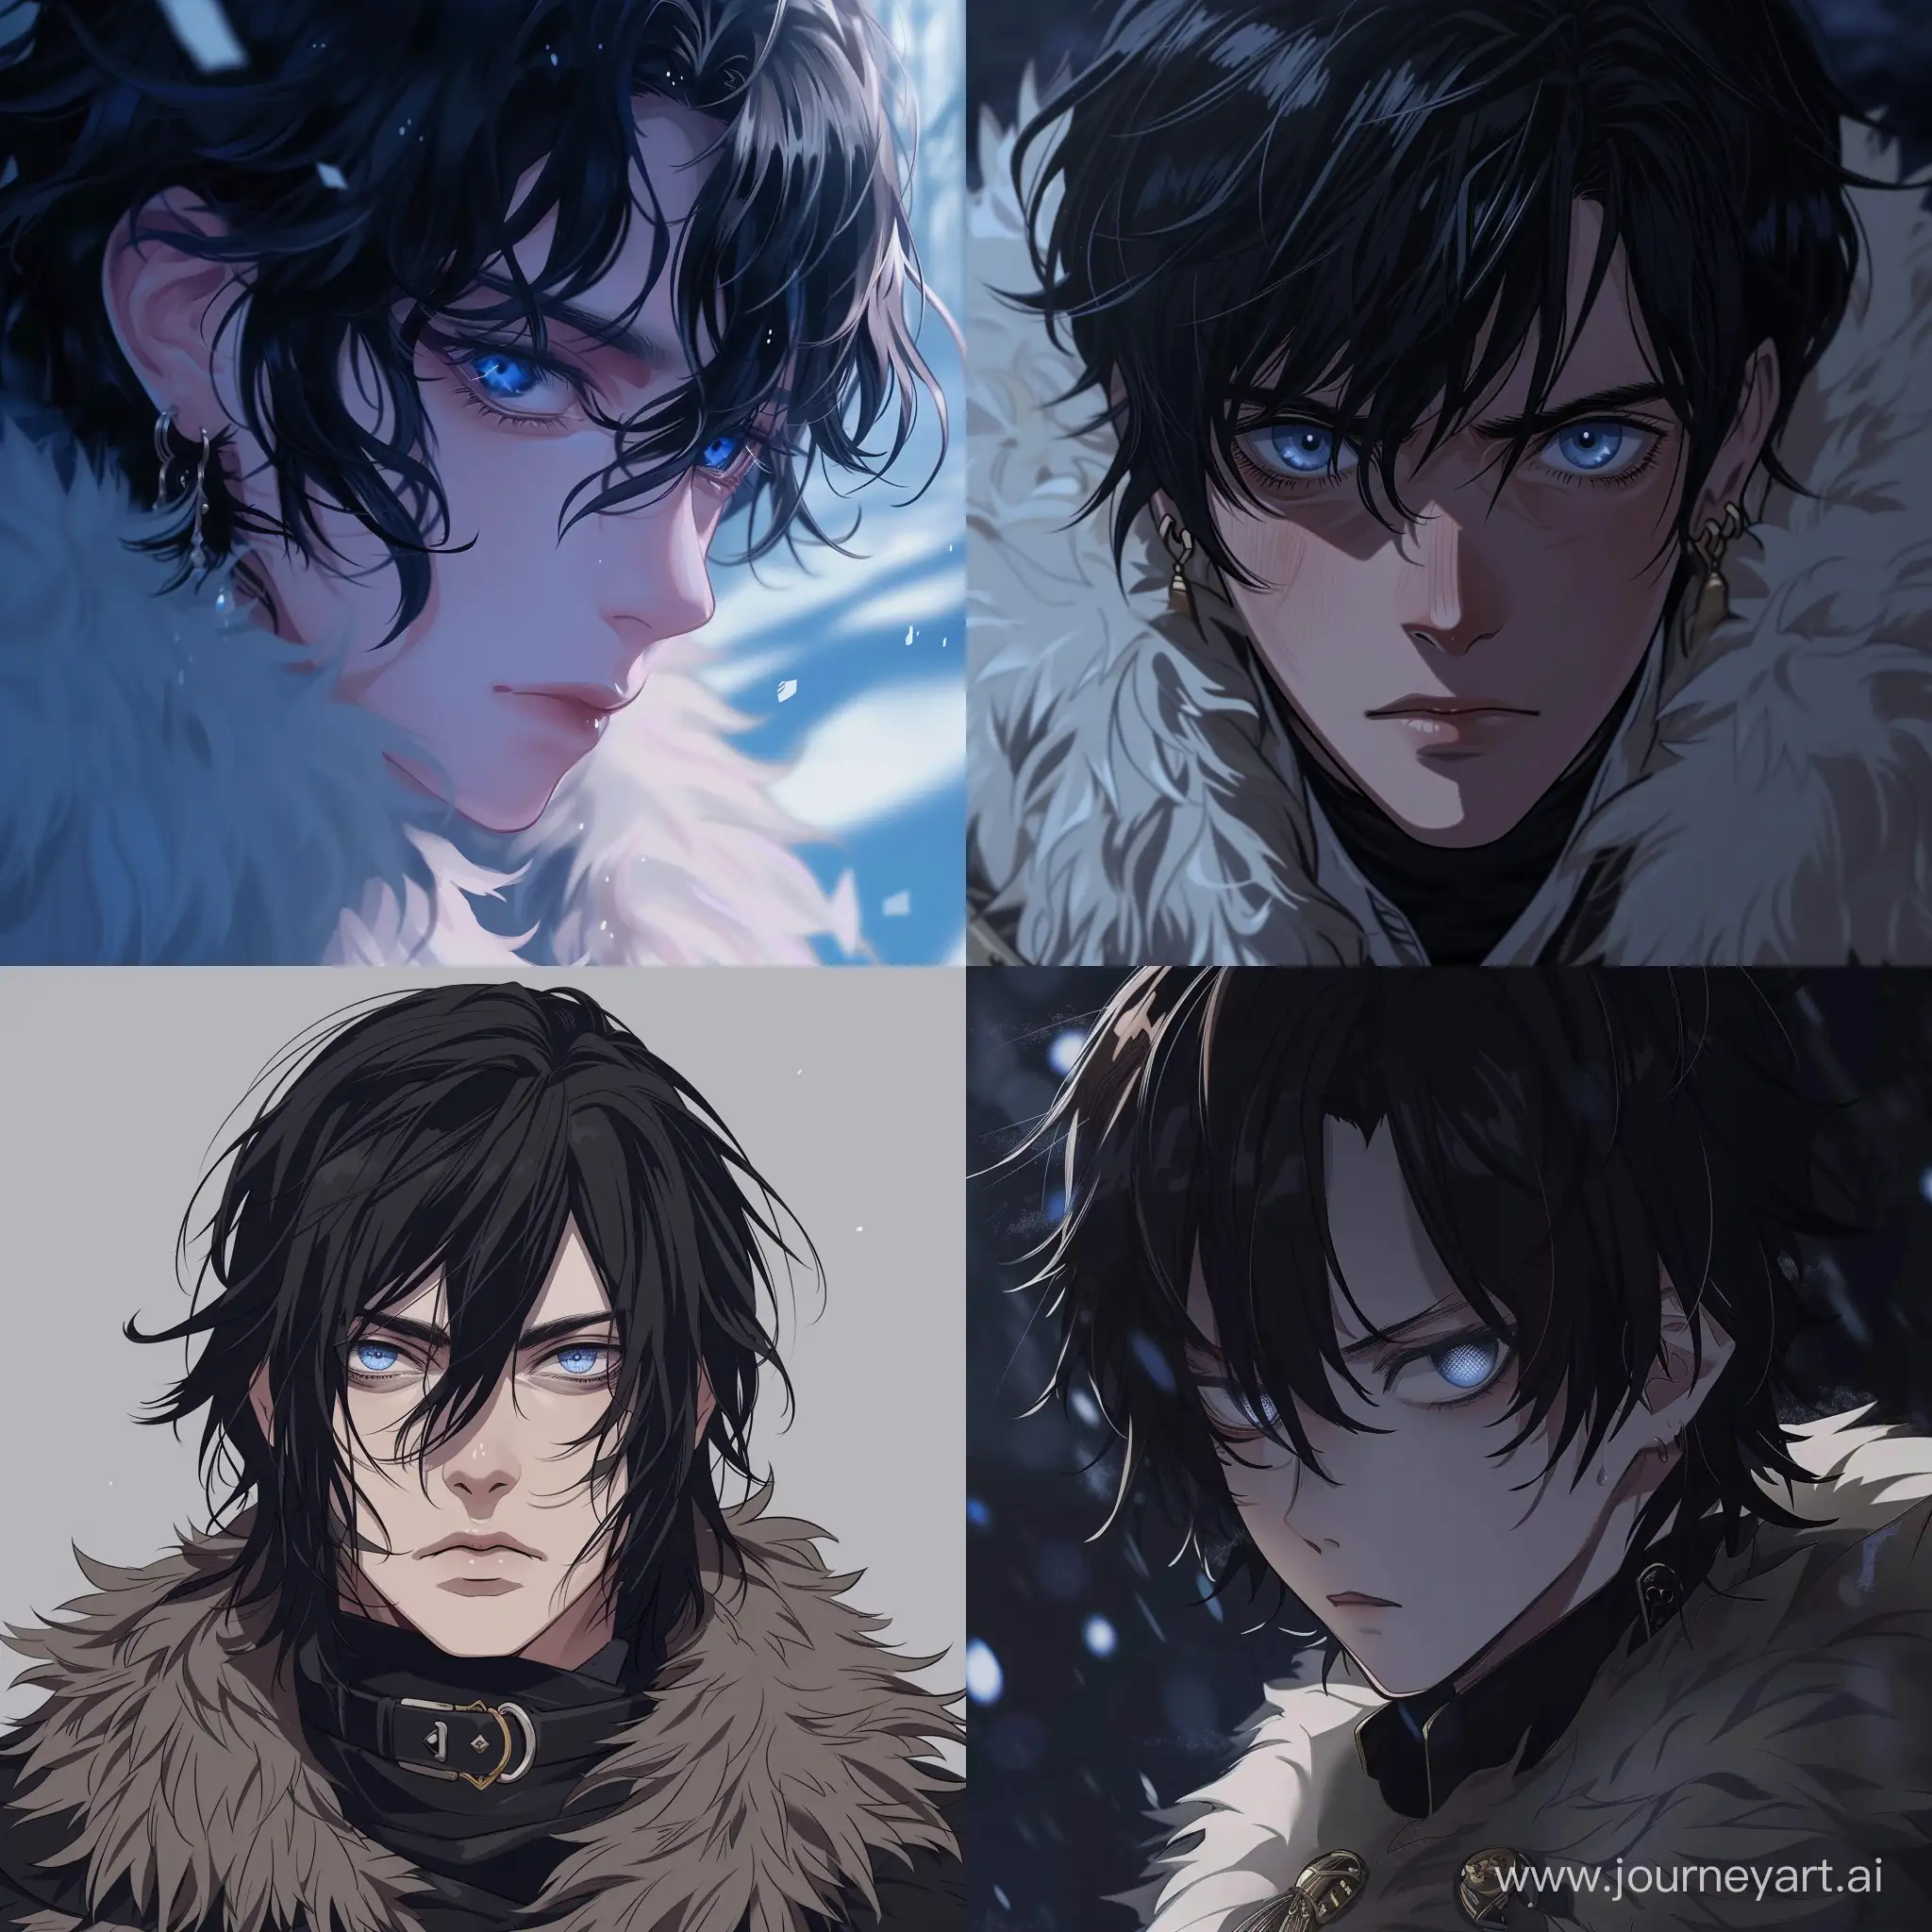 AnimeStyle-Portrait-ColdBlooded-Young-Duke-of-the-North-with-Black-Hair-and-Dark-Blue-Eyes